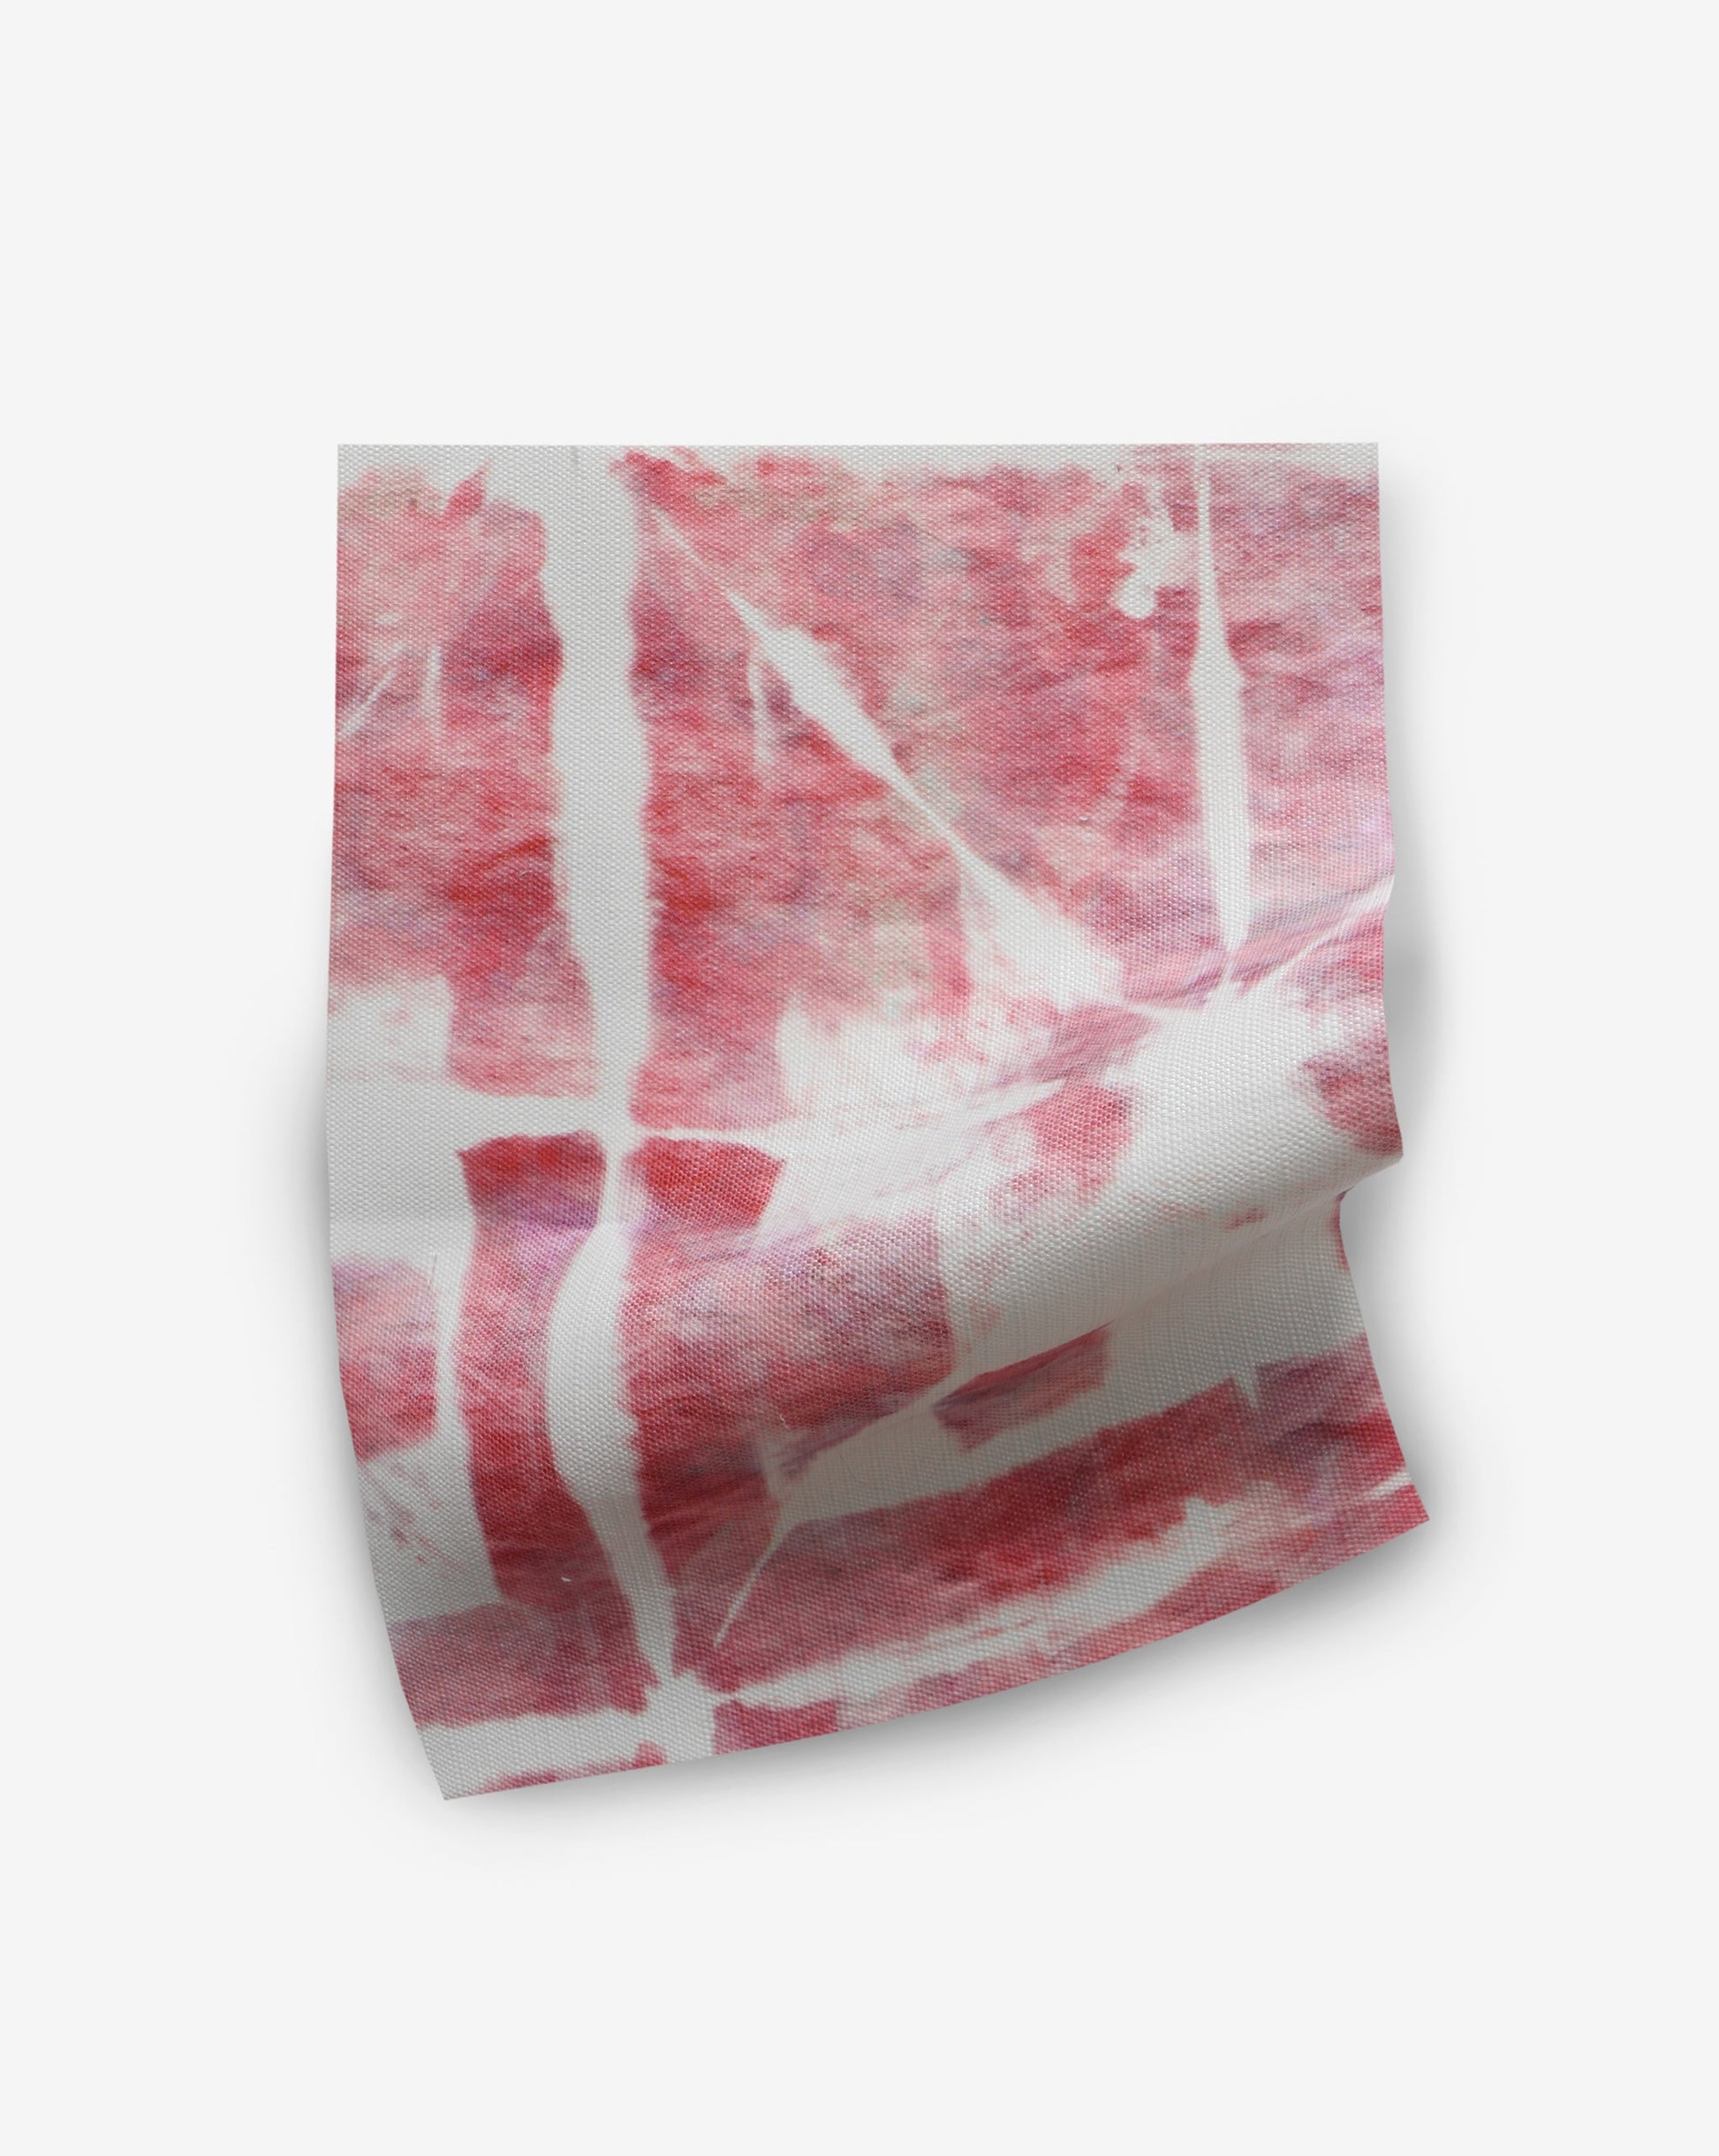 A piece of Banda Performance Fabric Persimmon with red and white stripes on it